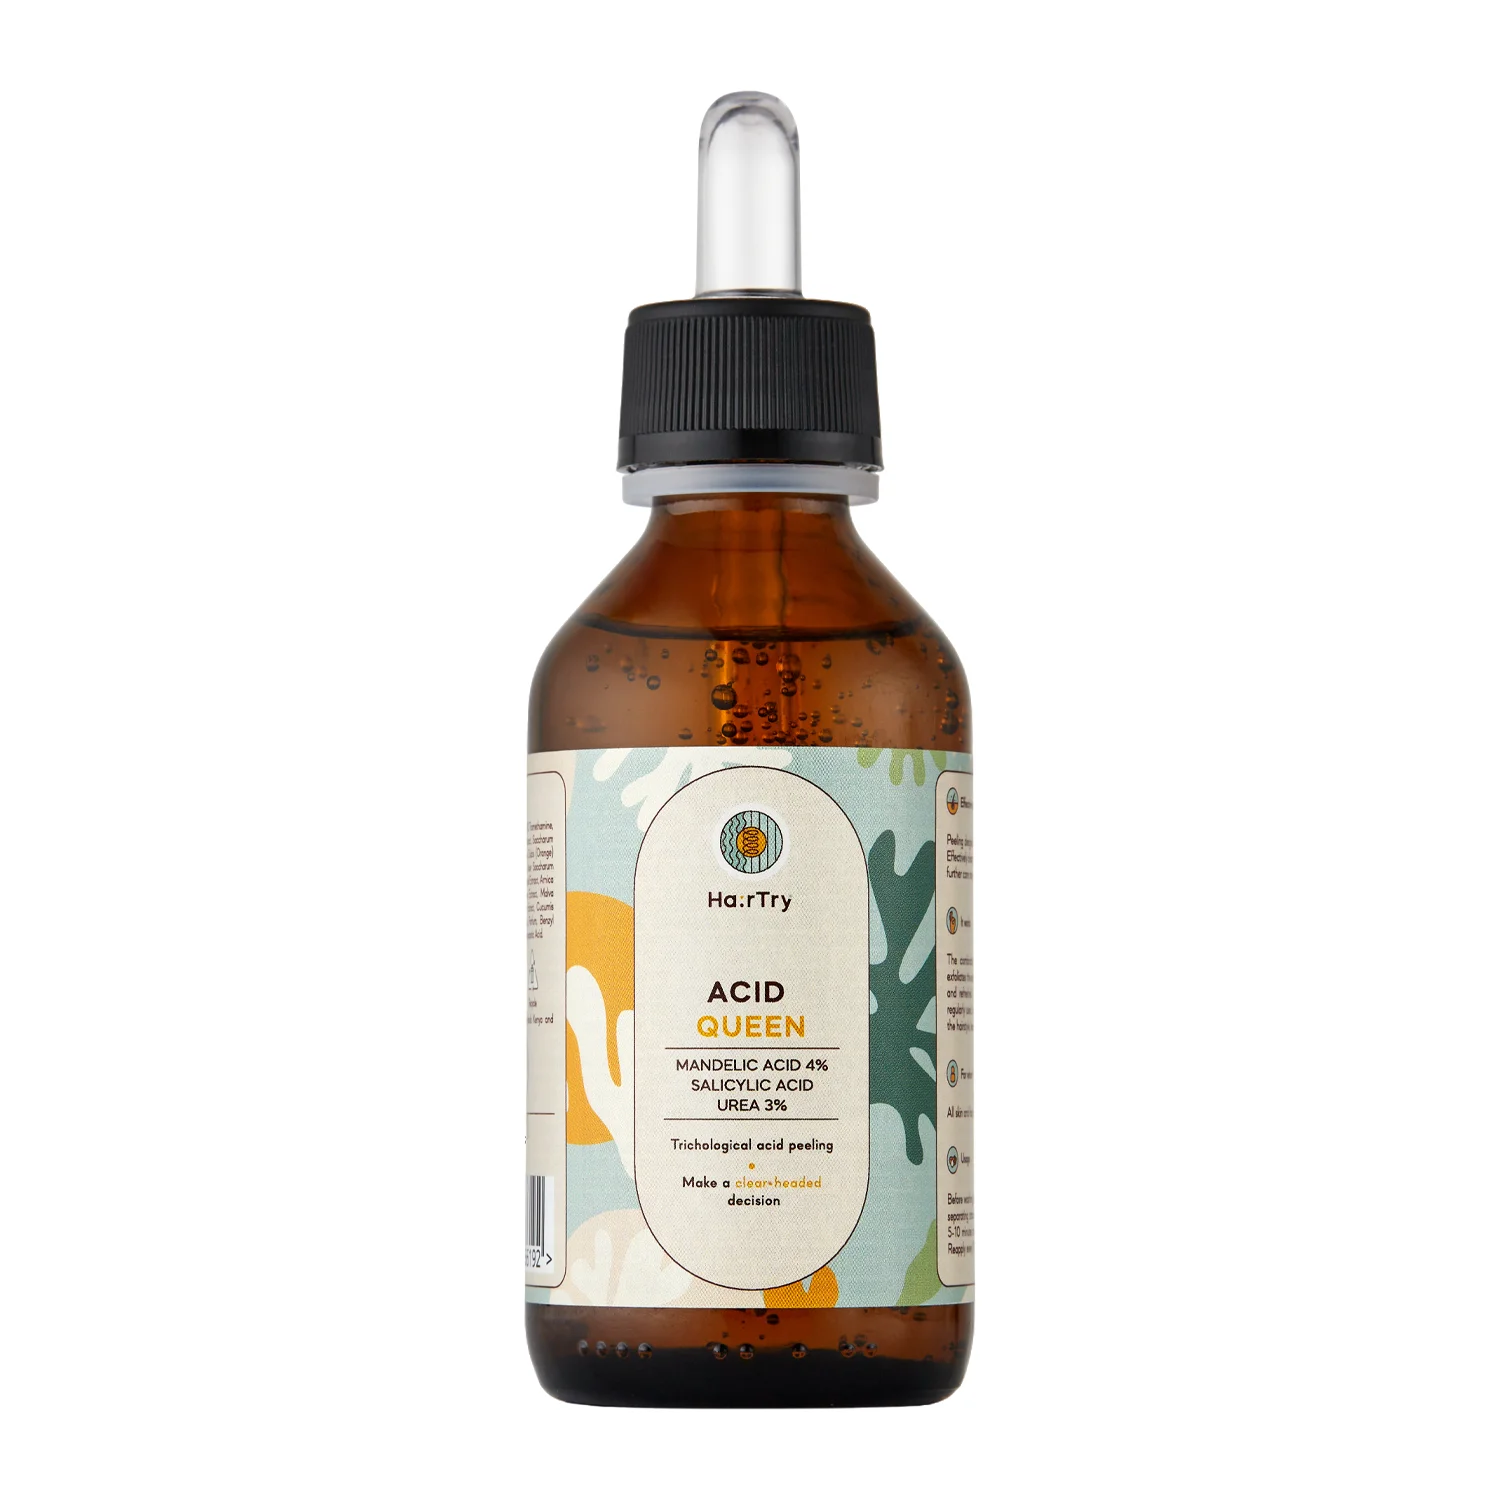 HairTry - Acid Queen - Trichological Acid Peel for the scalp - 100ml